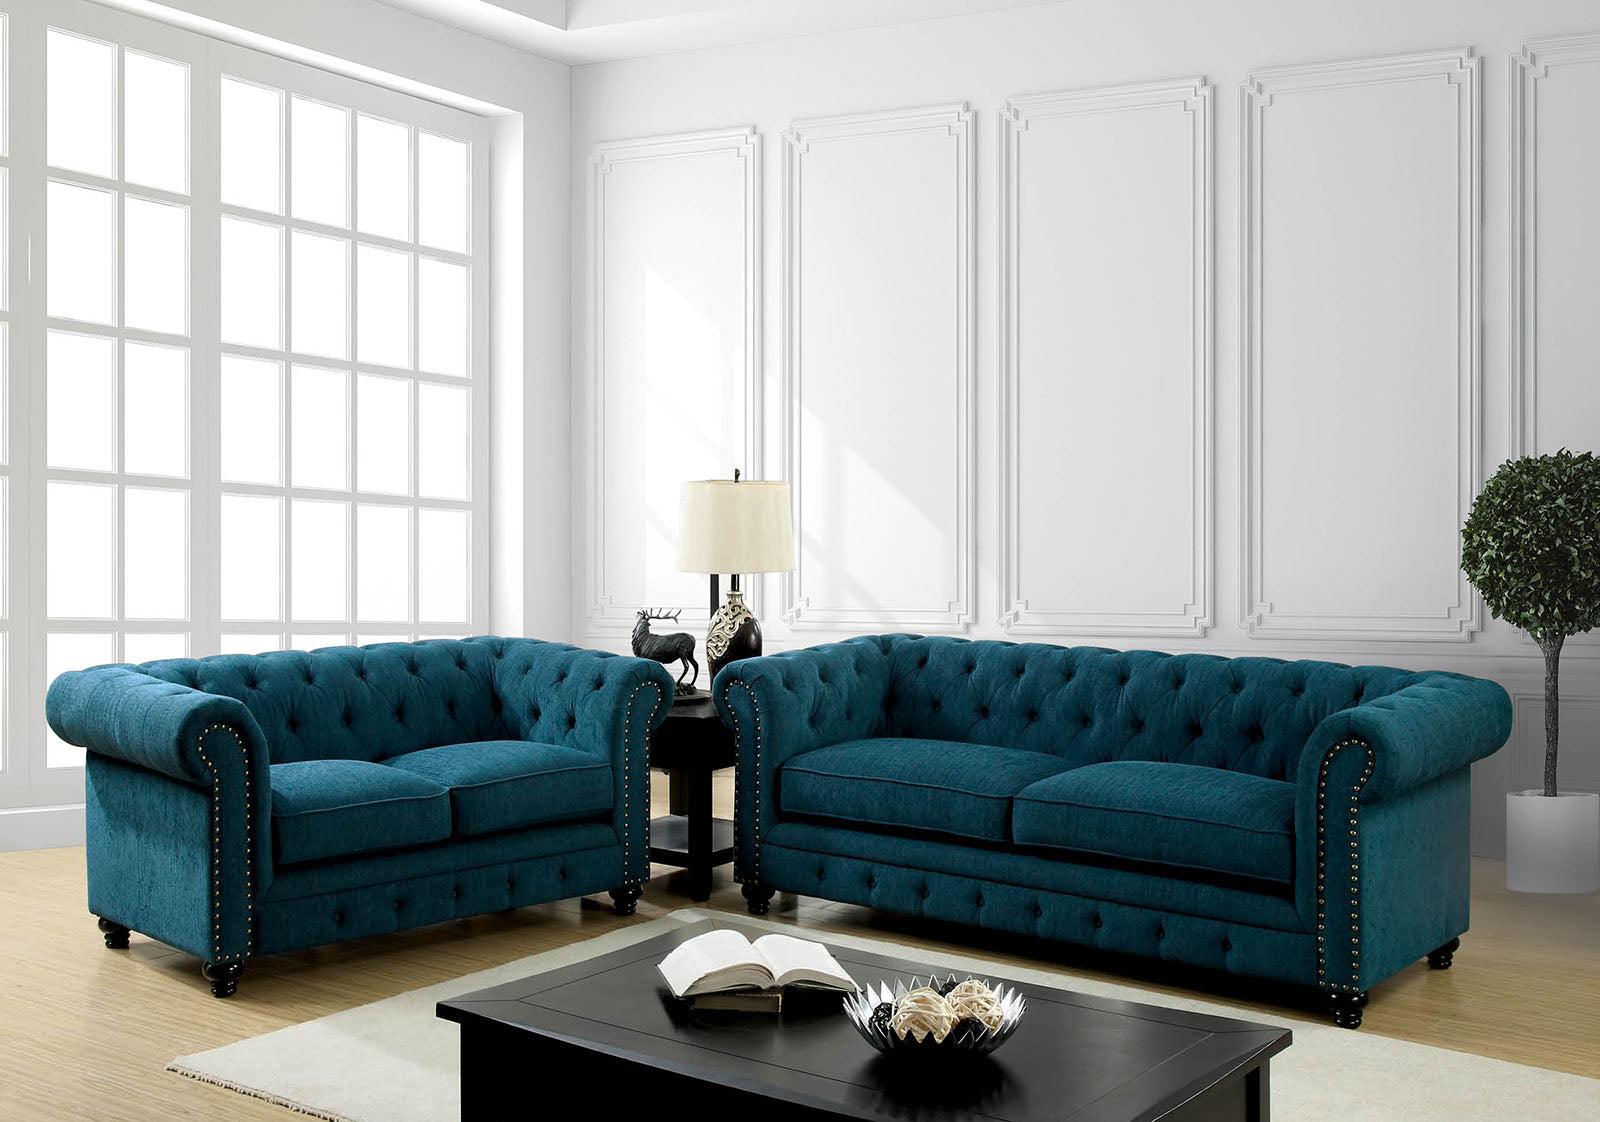 Transitional Sofa and Loveseat Set CM6269TL-2PC Stanford CM6269TL-2PC in Teal 